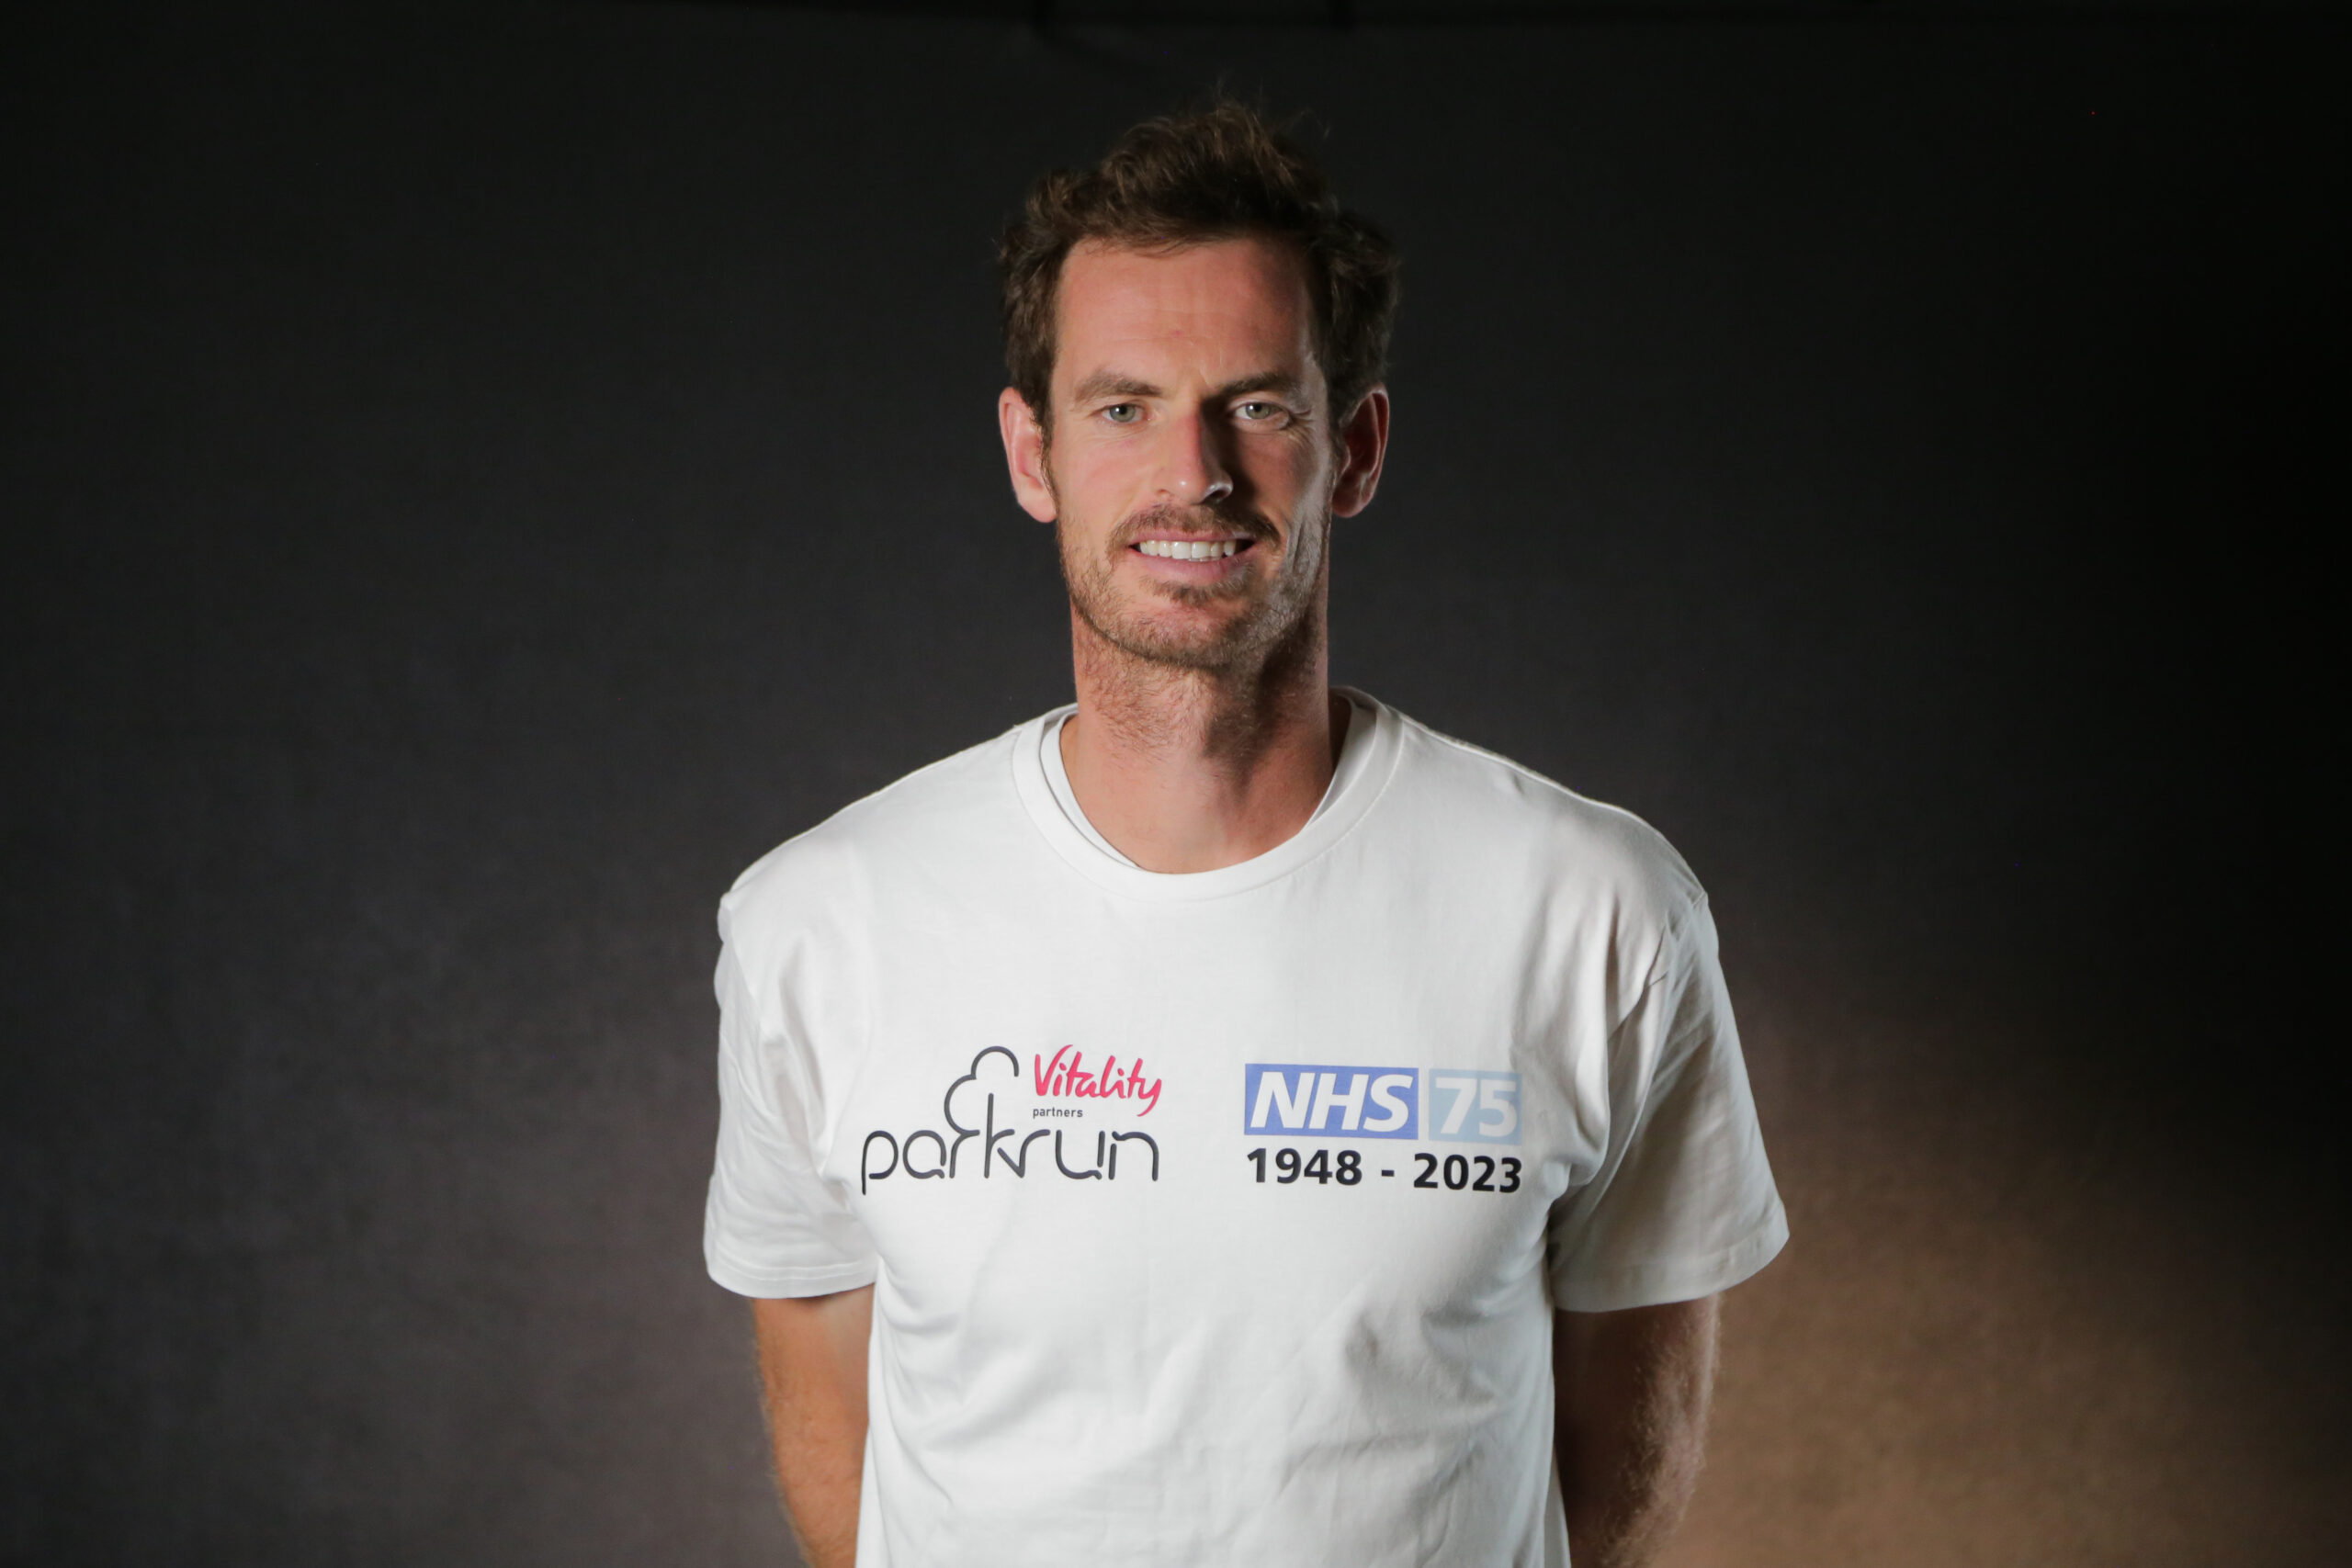 Sir Andy Murray OBE 